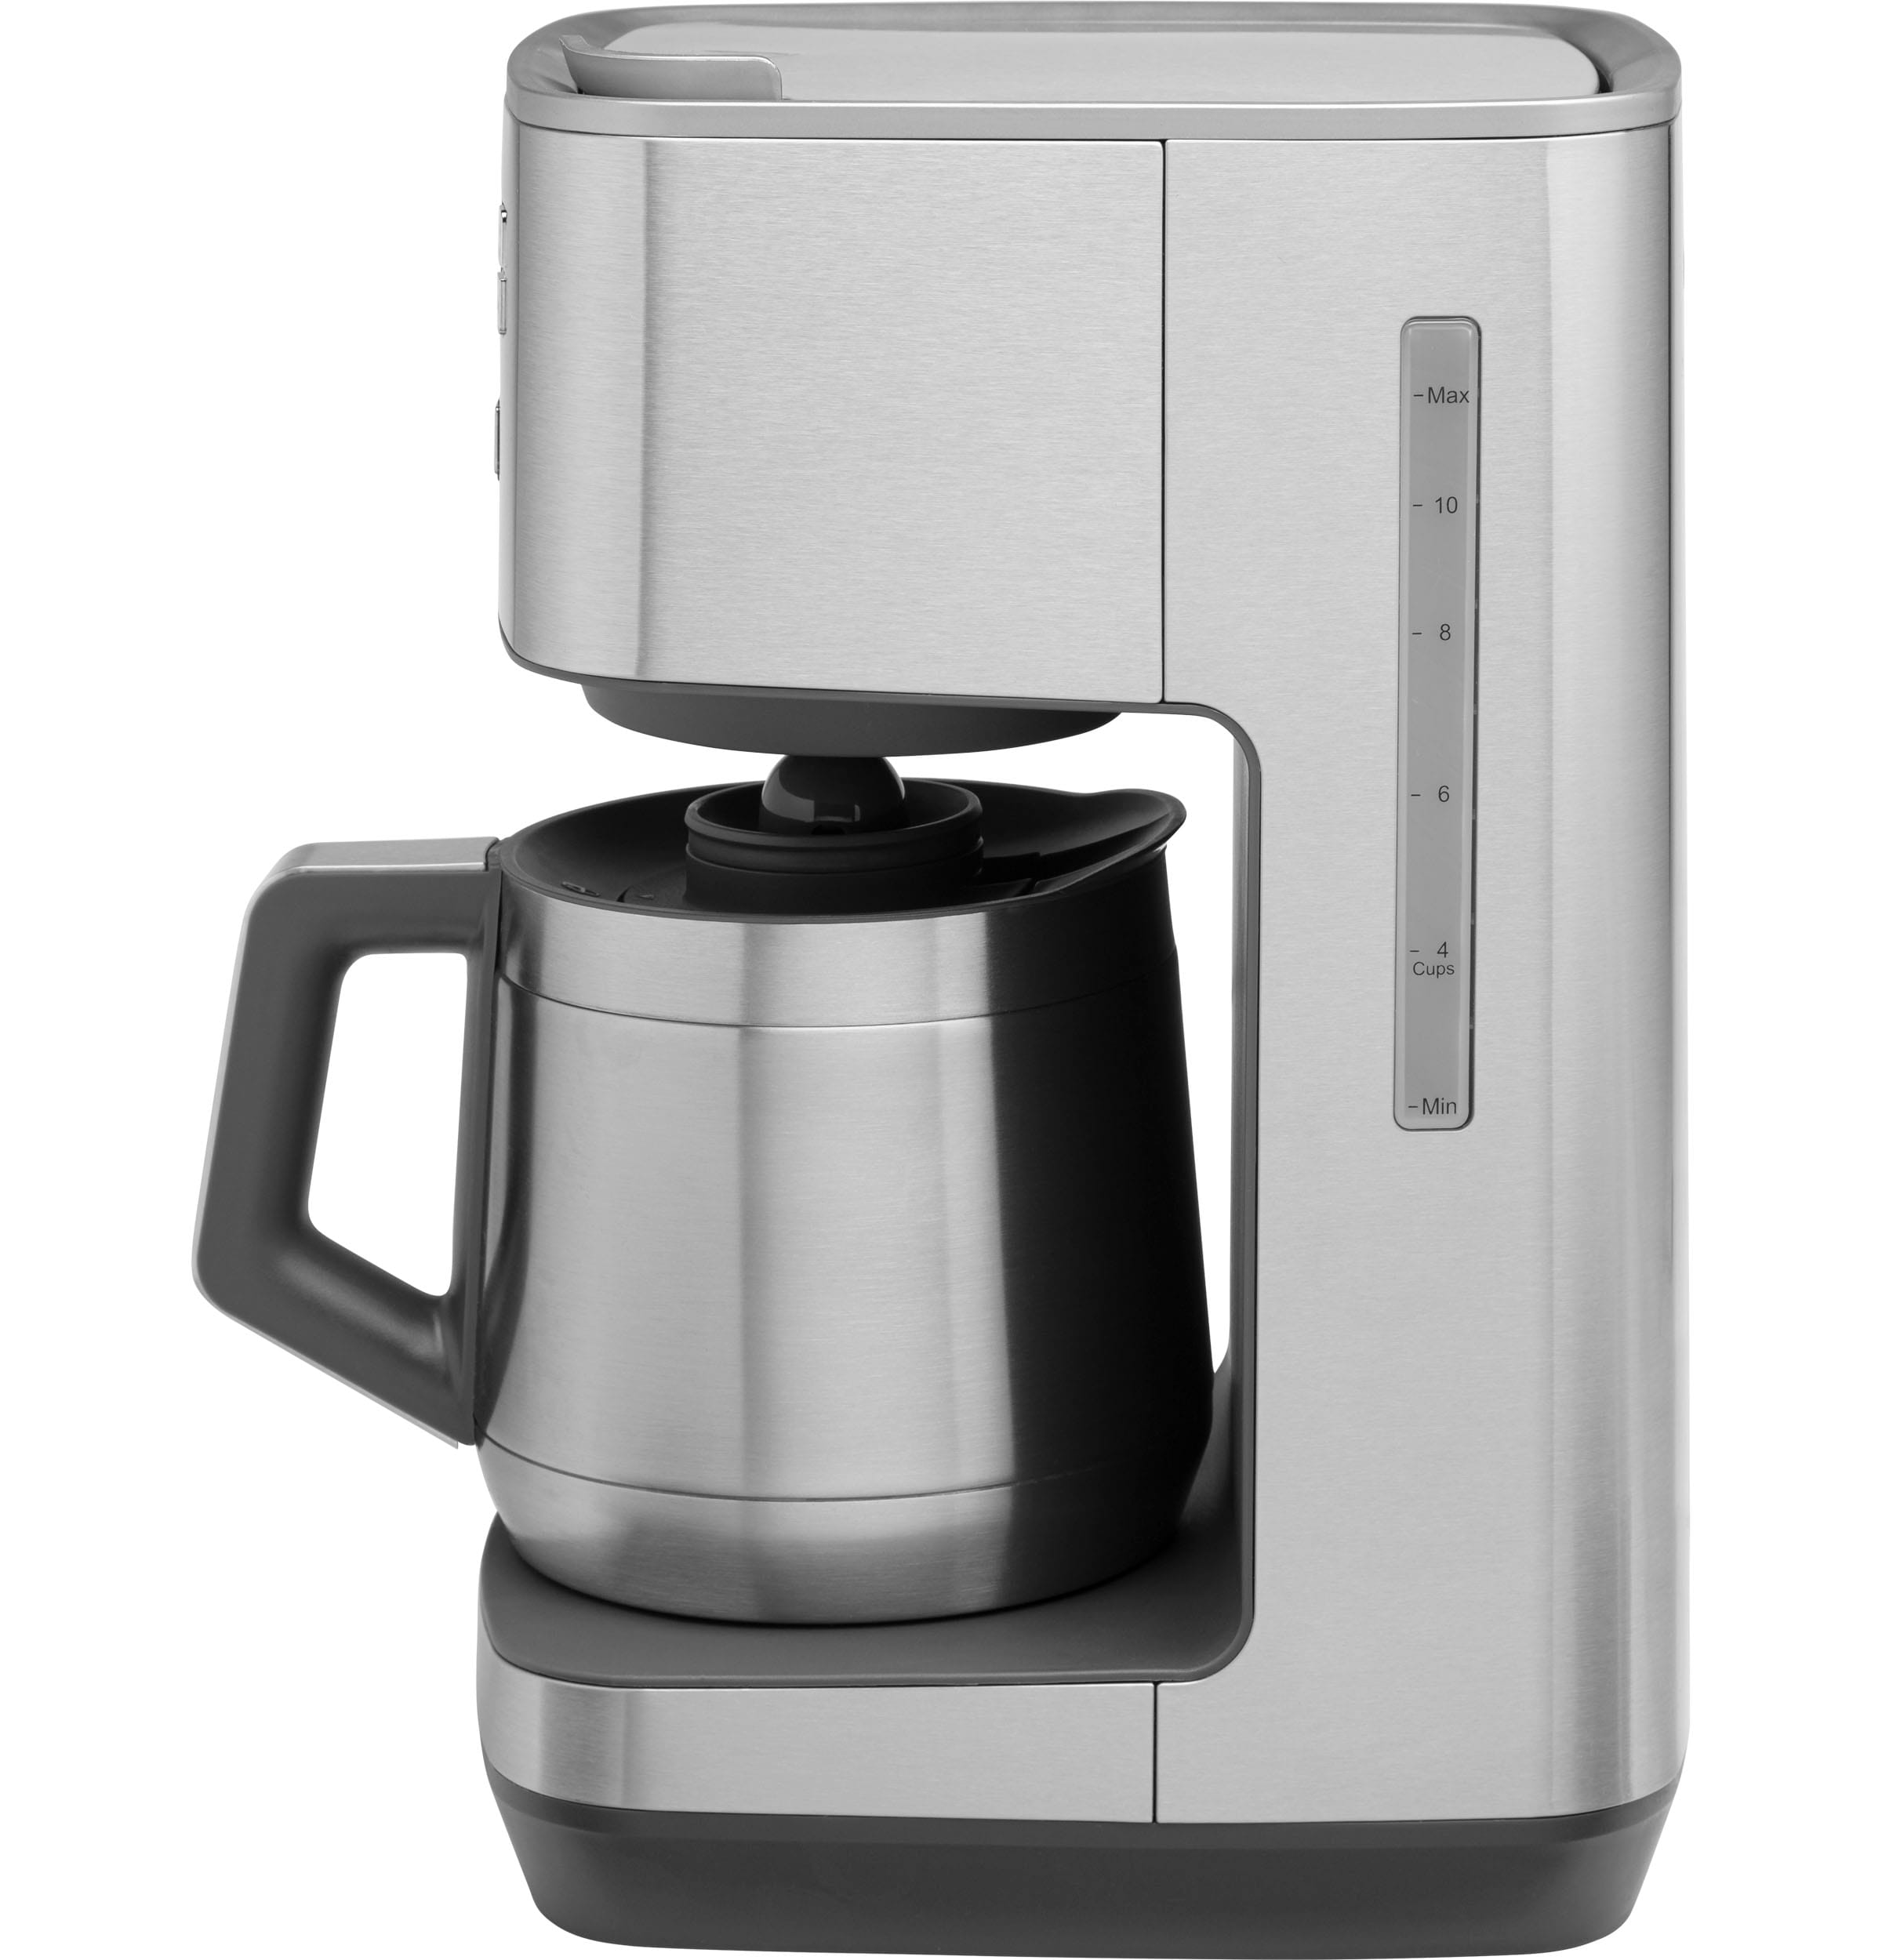 Café Specialty Drip Coffee Maker  10-Cup Insulated Thermal Carafe